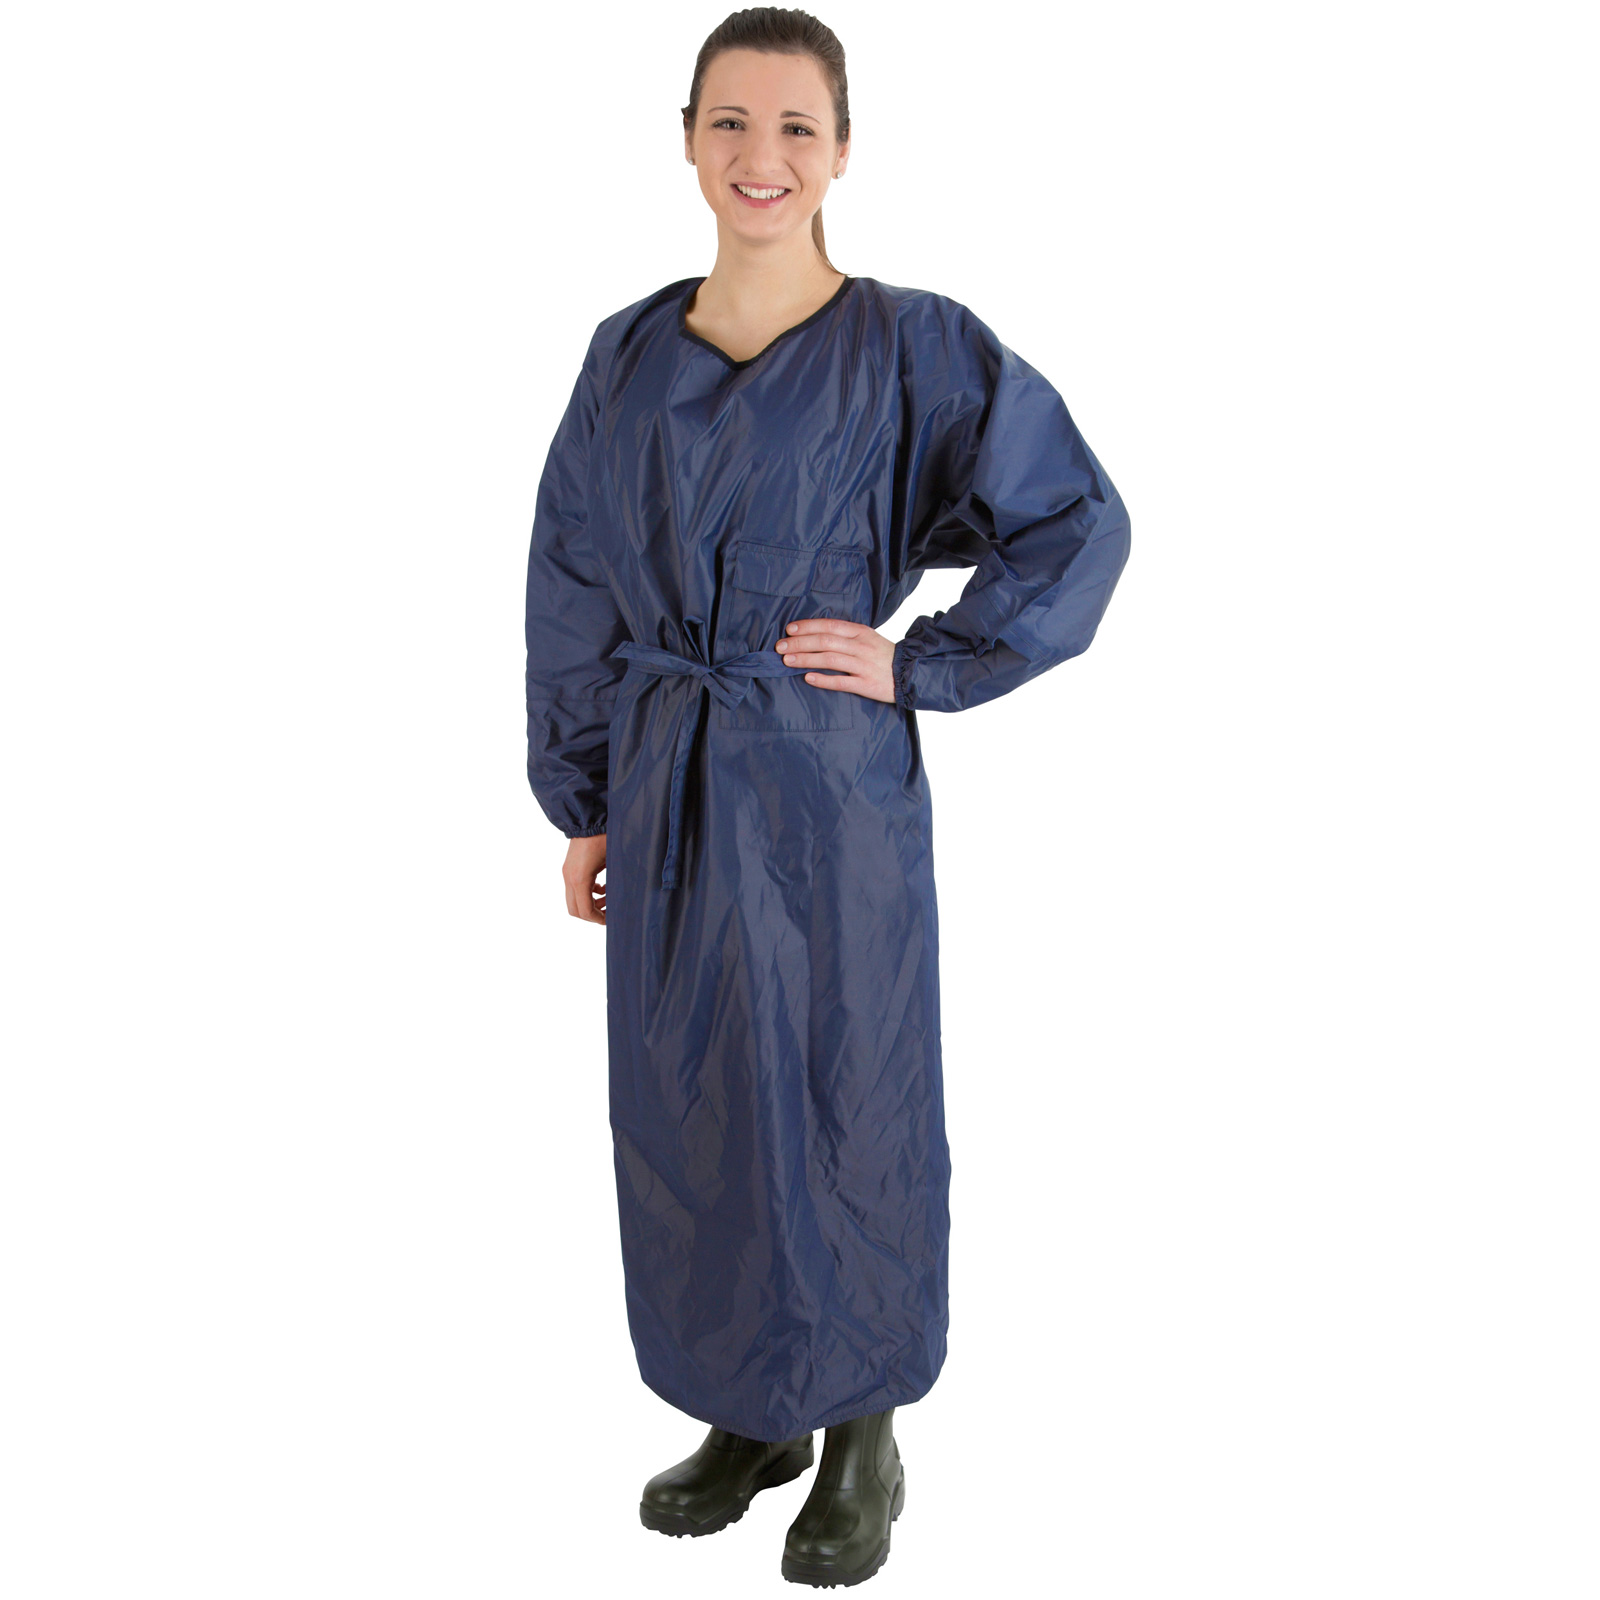 Milking & Washing Apron with Sleeves, navy XL